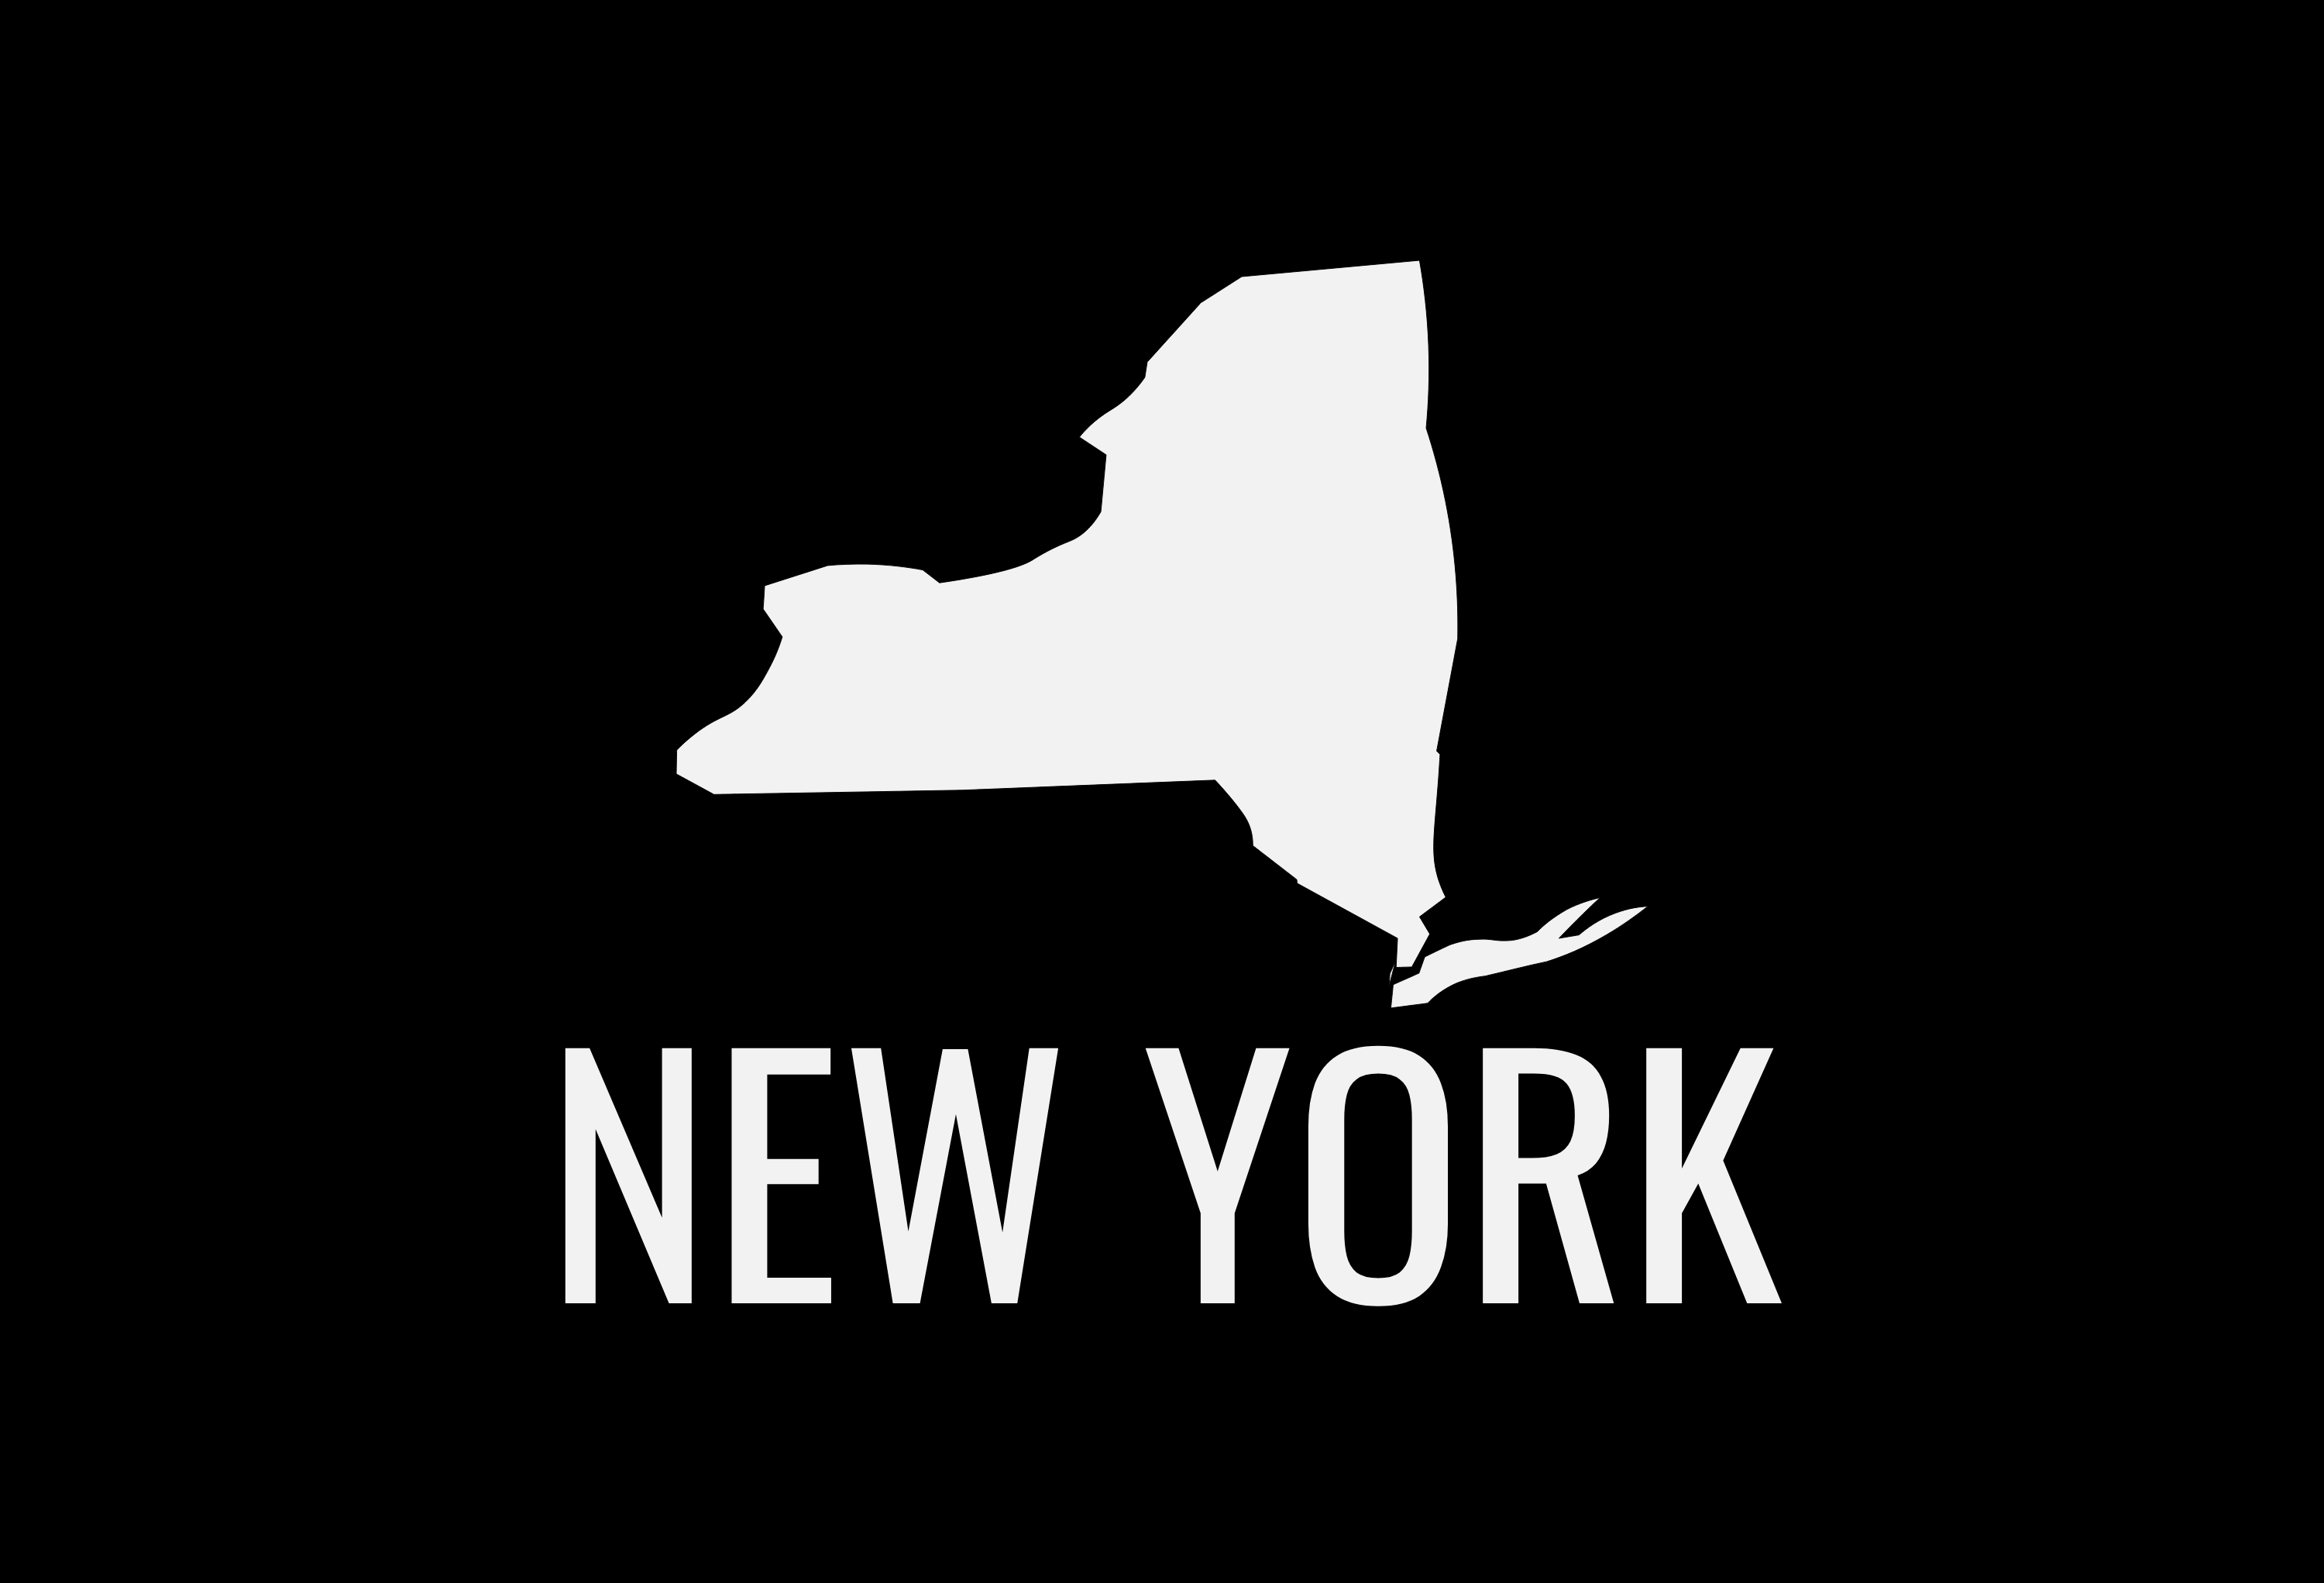 New York State Map Car Decal - Permanent Vinyl Sticker for Cars, Vehicle, Doors, Windows, Laptop, and more!